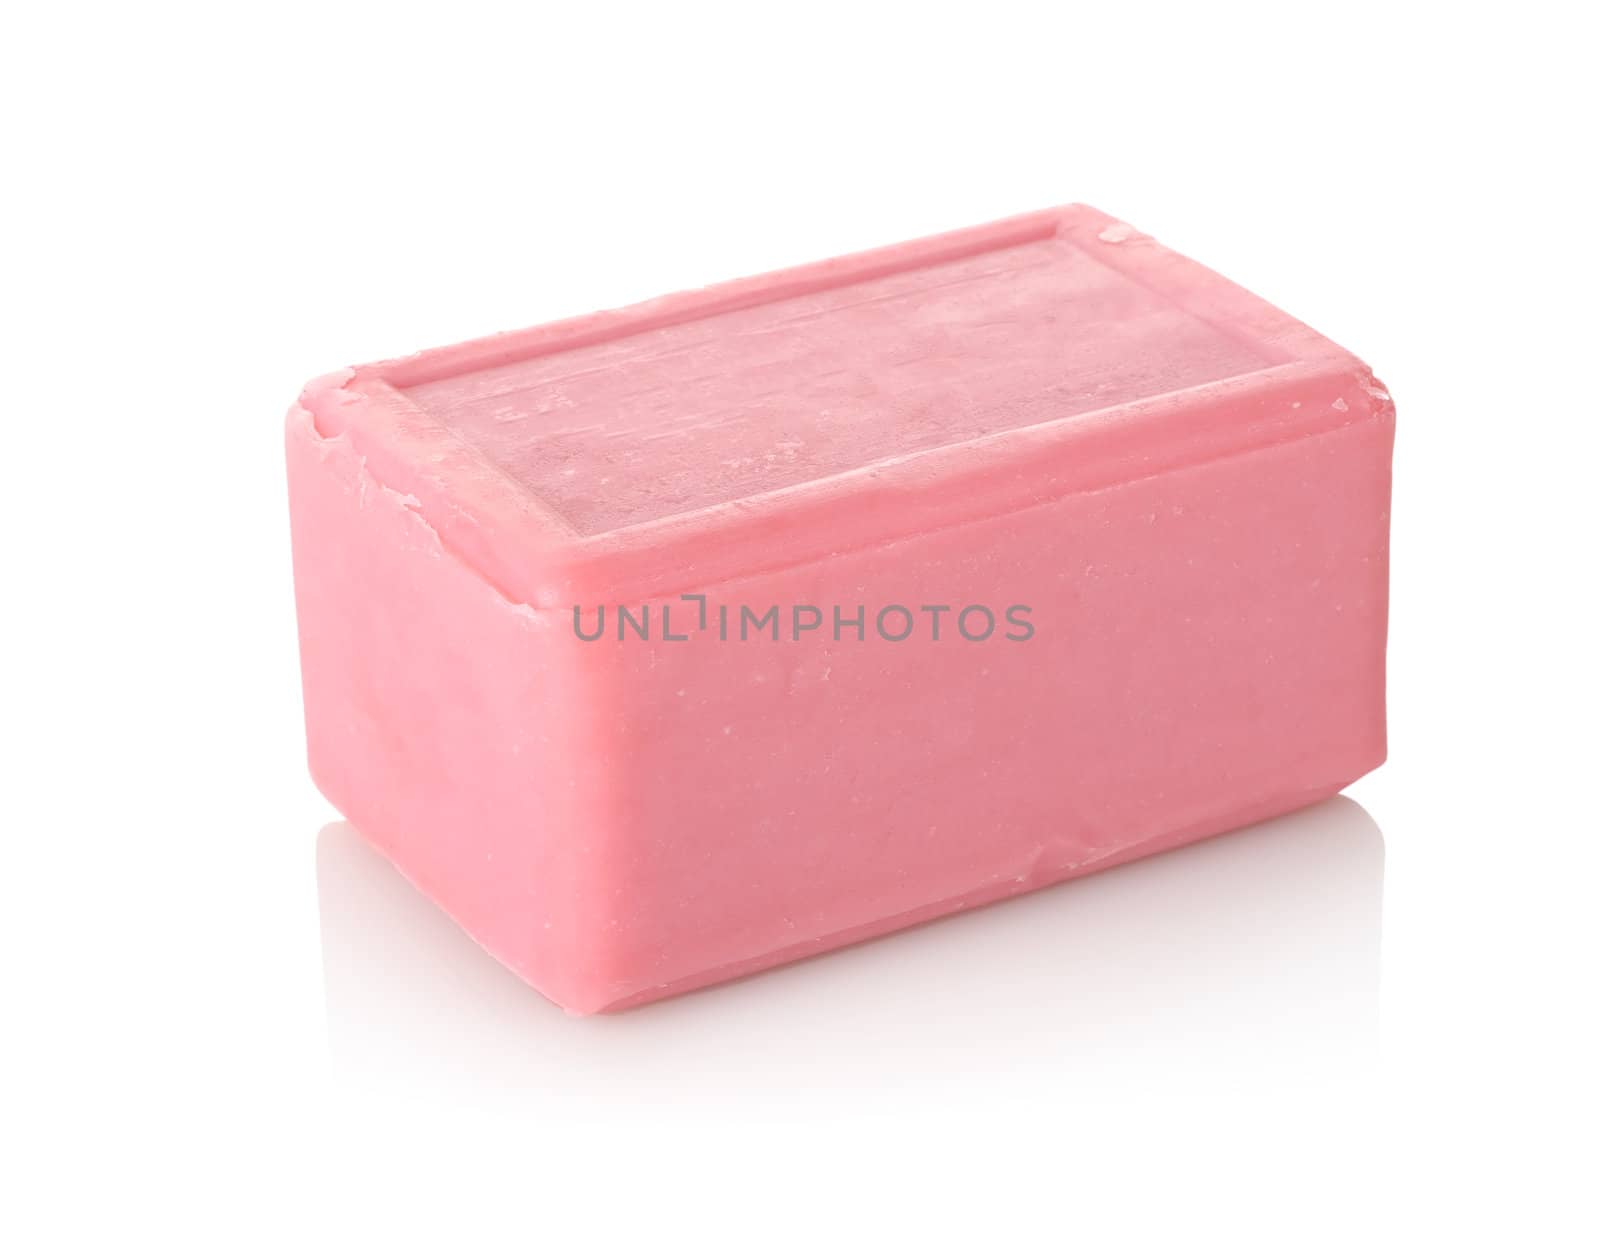 Pink soap isolated on a white background